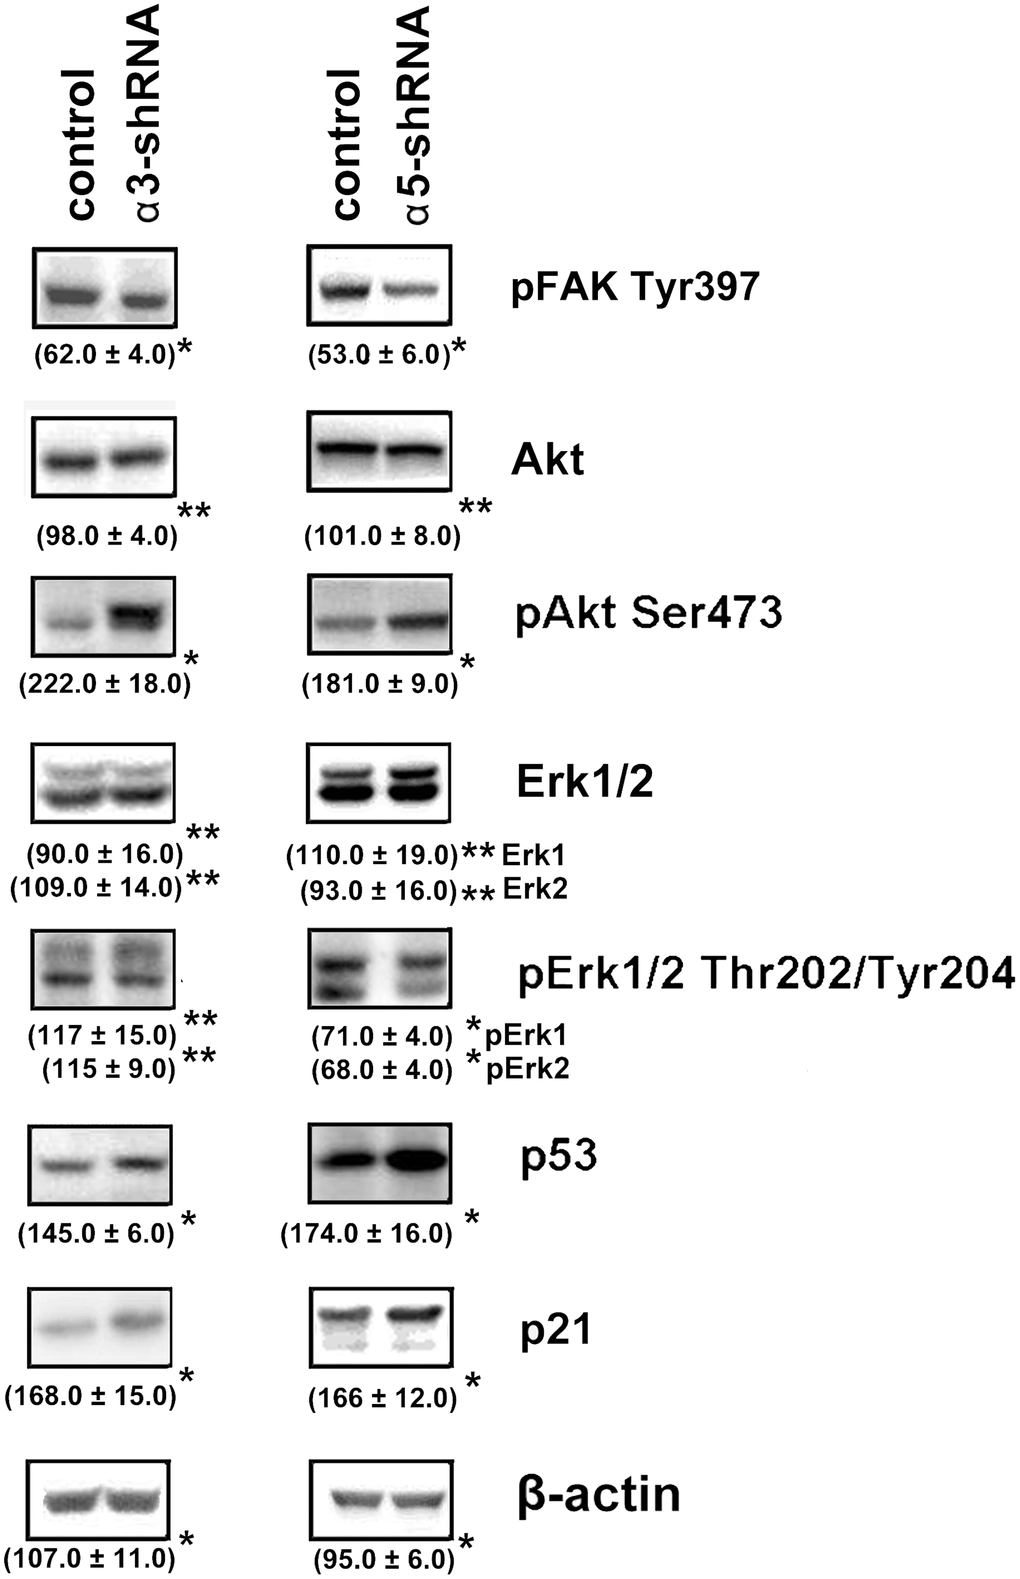 Effect of knock-down of α3β1 or α5β1 on expression of signaling proteins in SK-Mel-147 cells. The cells were transduced with the scrambled shRNA or α3/α5 shRNAs, cell lysate proteins were run on SDS-PAGE and western-blotted as described in Materials and Methods. The blots were probed with 1:1000 dilution of antibodies to the specified proteins. Shown are representative blots. Numbers below the bands indicate the ratio (%) protein level in integrin shRNA transfected cells compared to control shRNA transfected cells normalized against β-actin. Results of three independent experiments are shown (M ± SEM). *ρ 